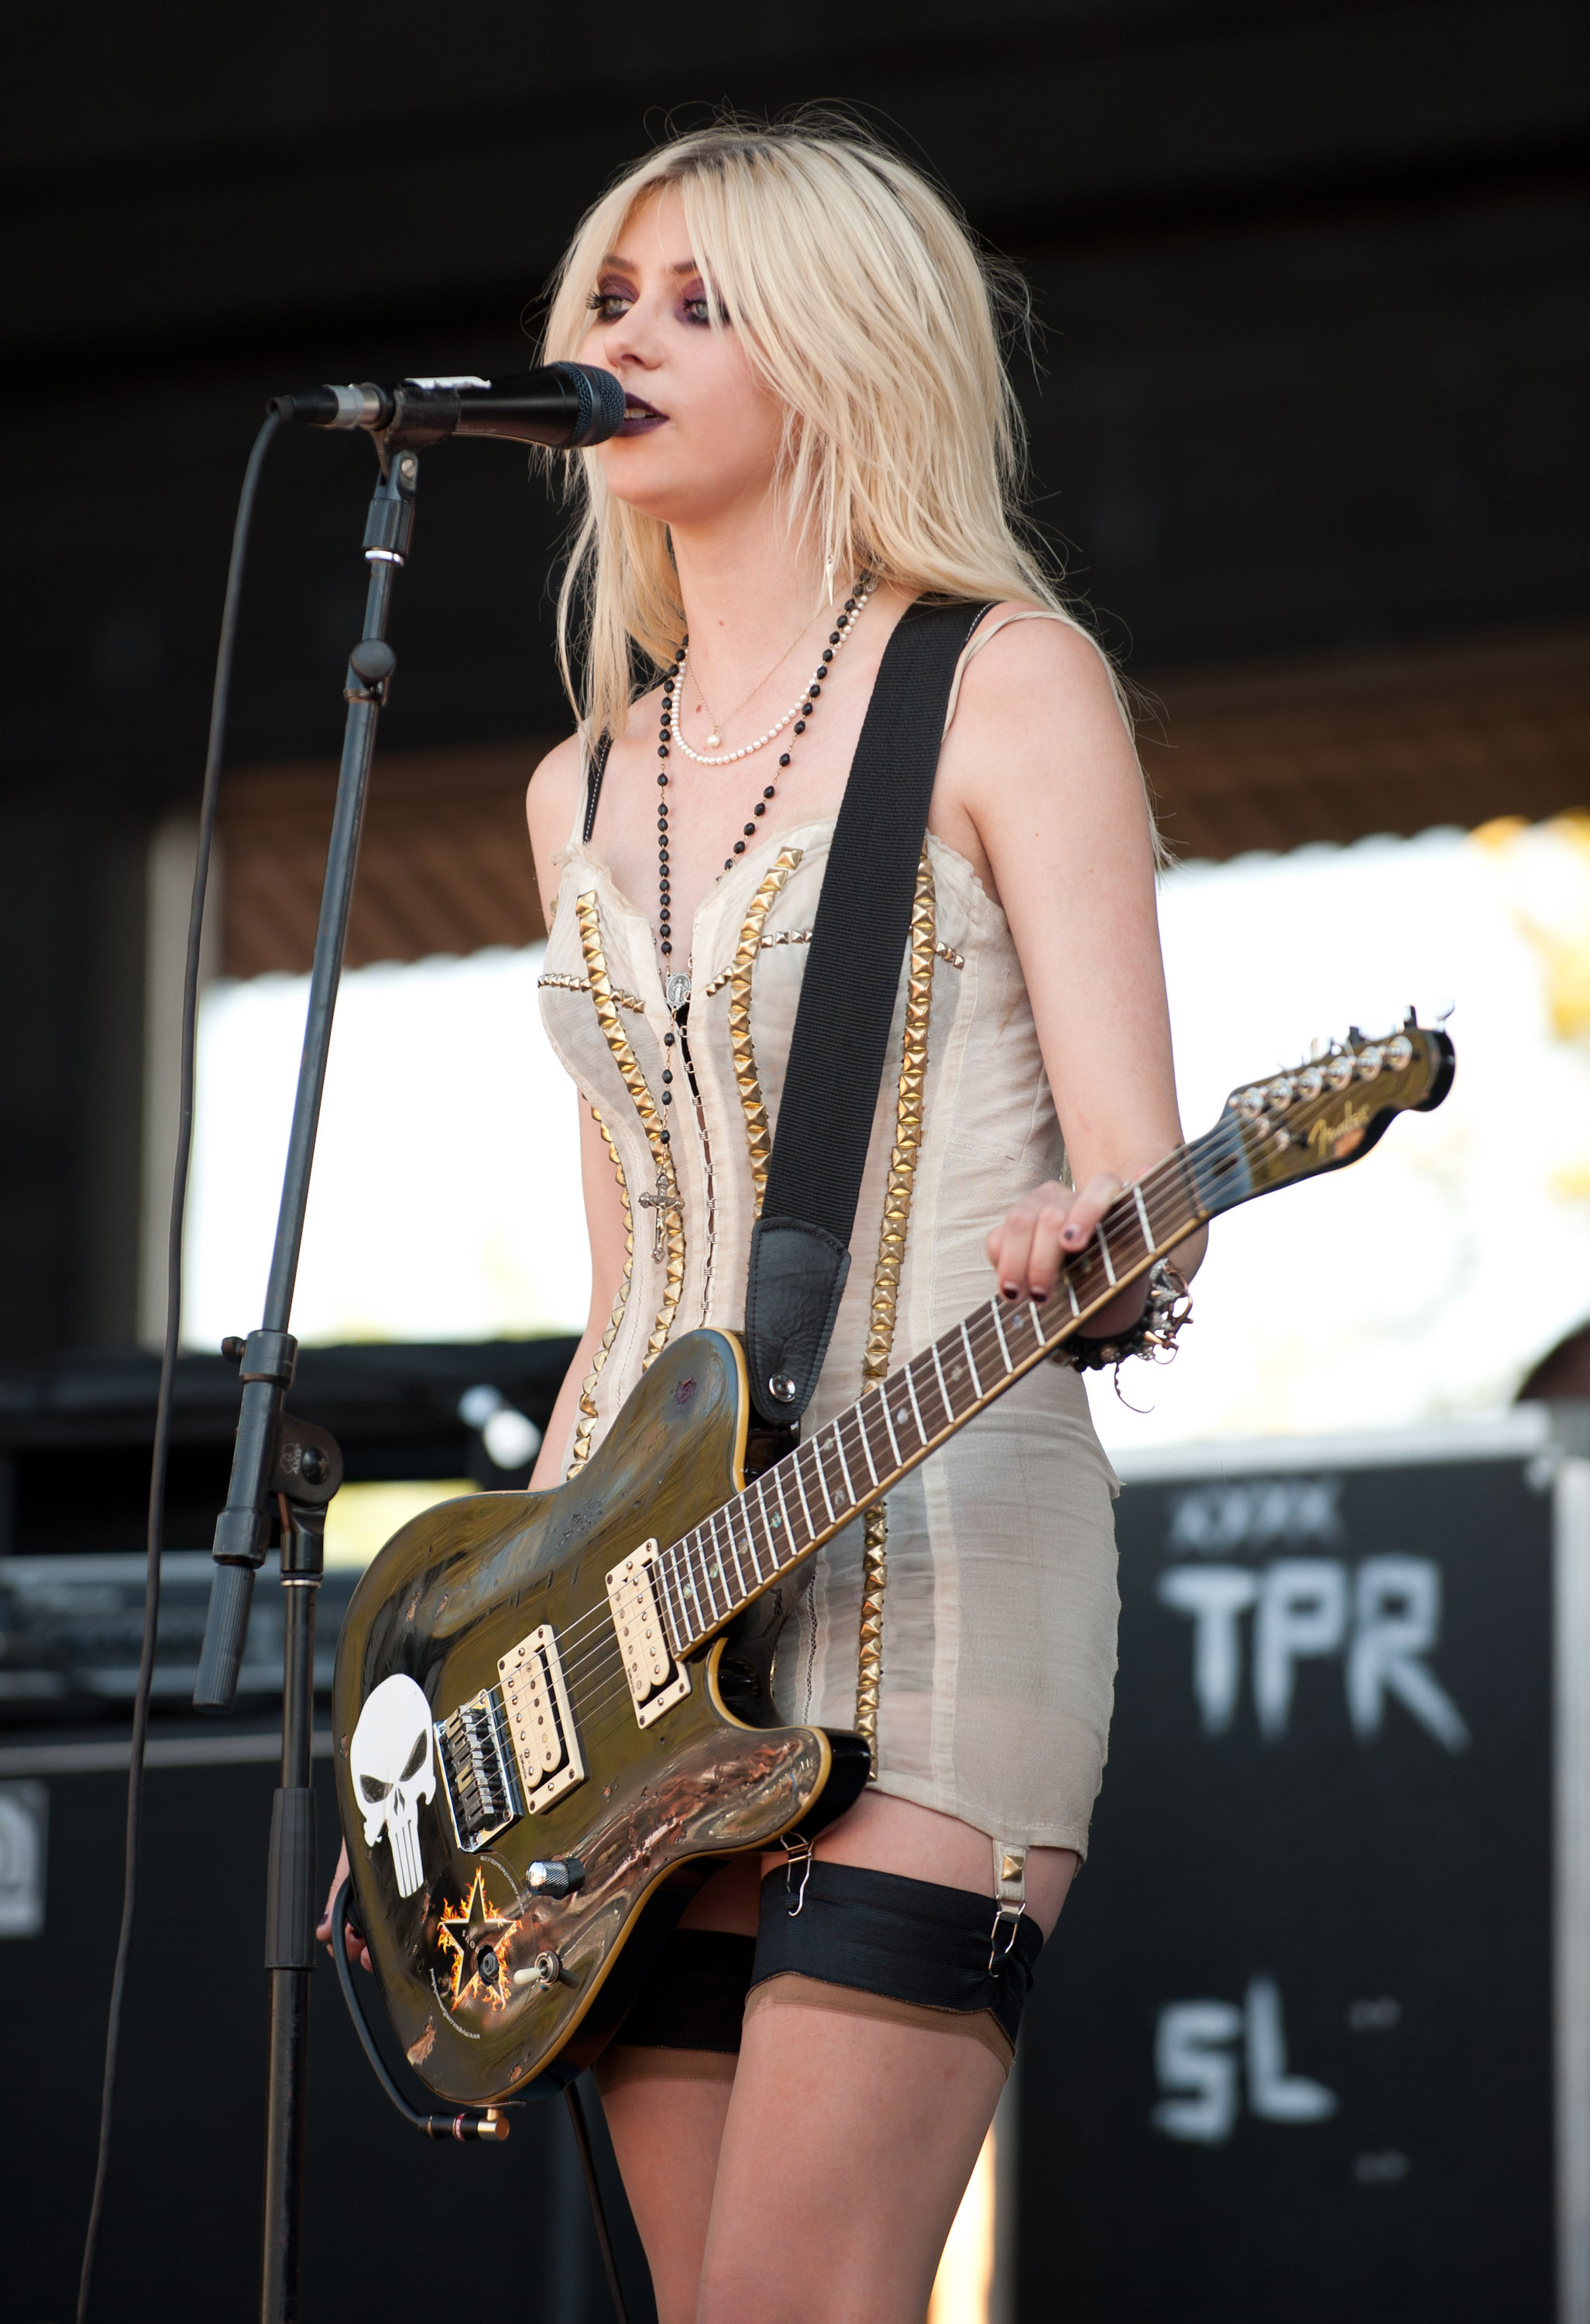 Taylor Momsen performing at the Vans Warped Tour at Sleep Train Amphitheater on August 12, 2010 in Wheatland, California | Source: Getty Images